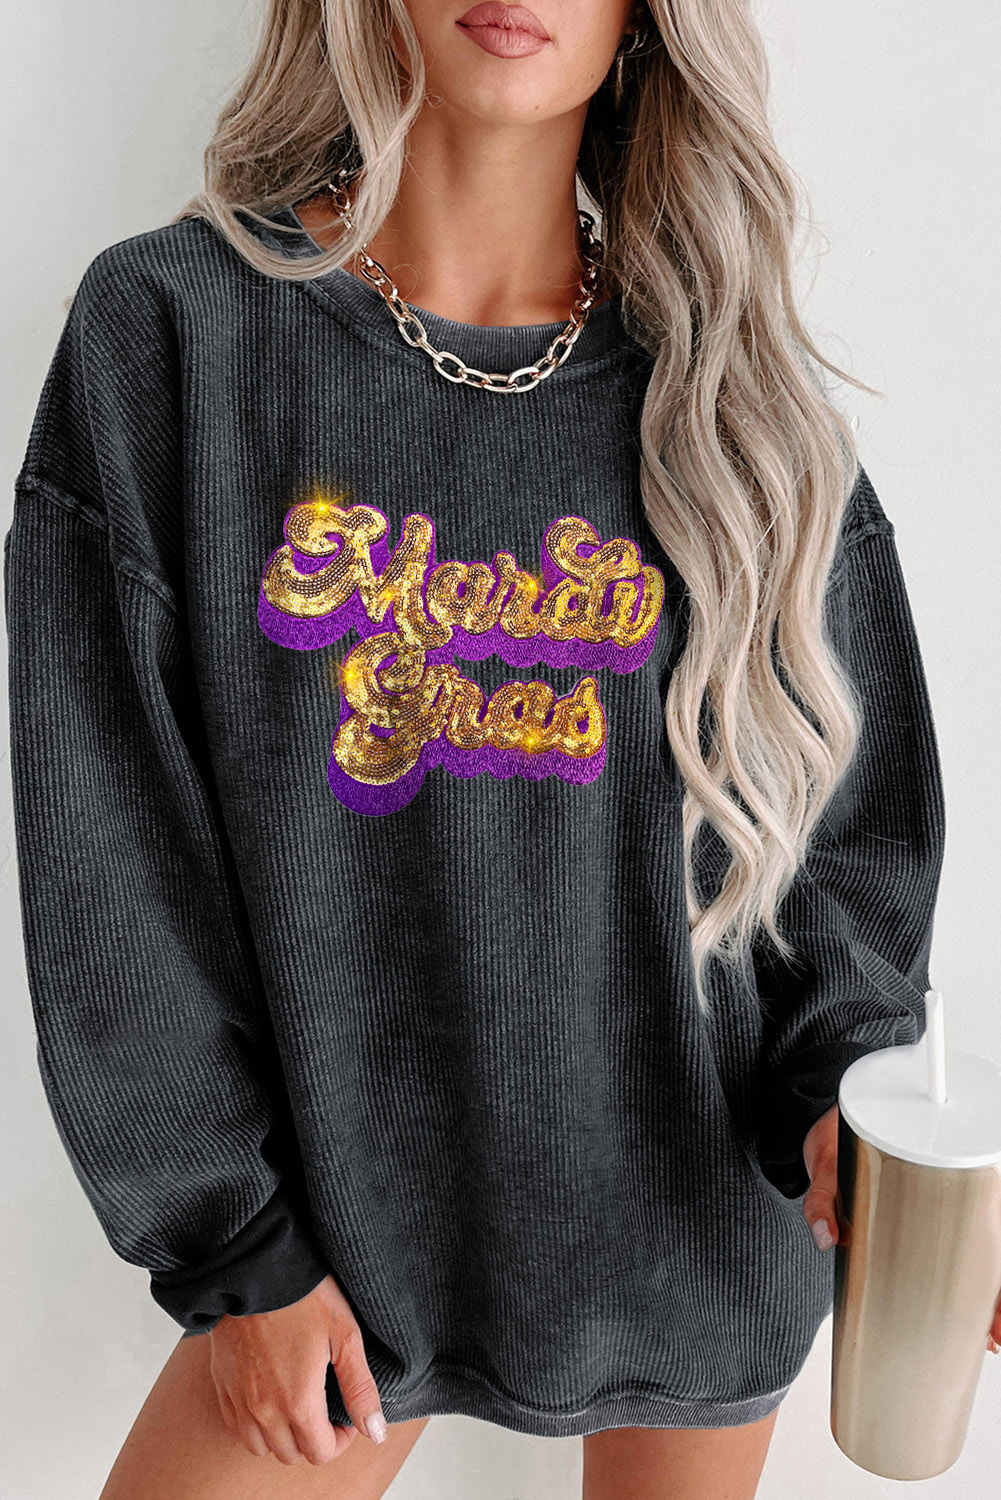 Shewin Wholesale Dropshippers Black Sequin Mardi Gras Embroidered Graphic Pullover SWEATSHIRT